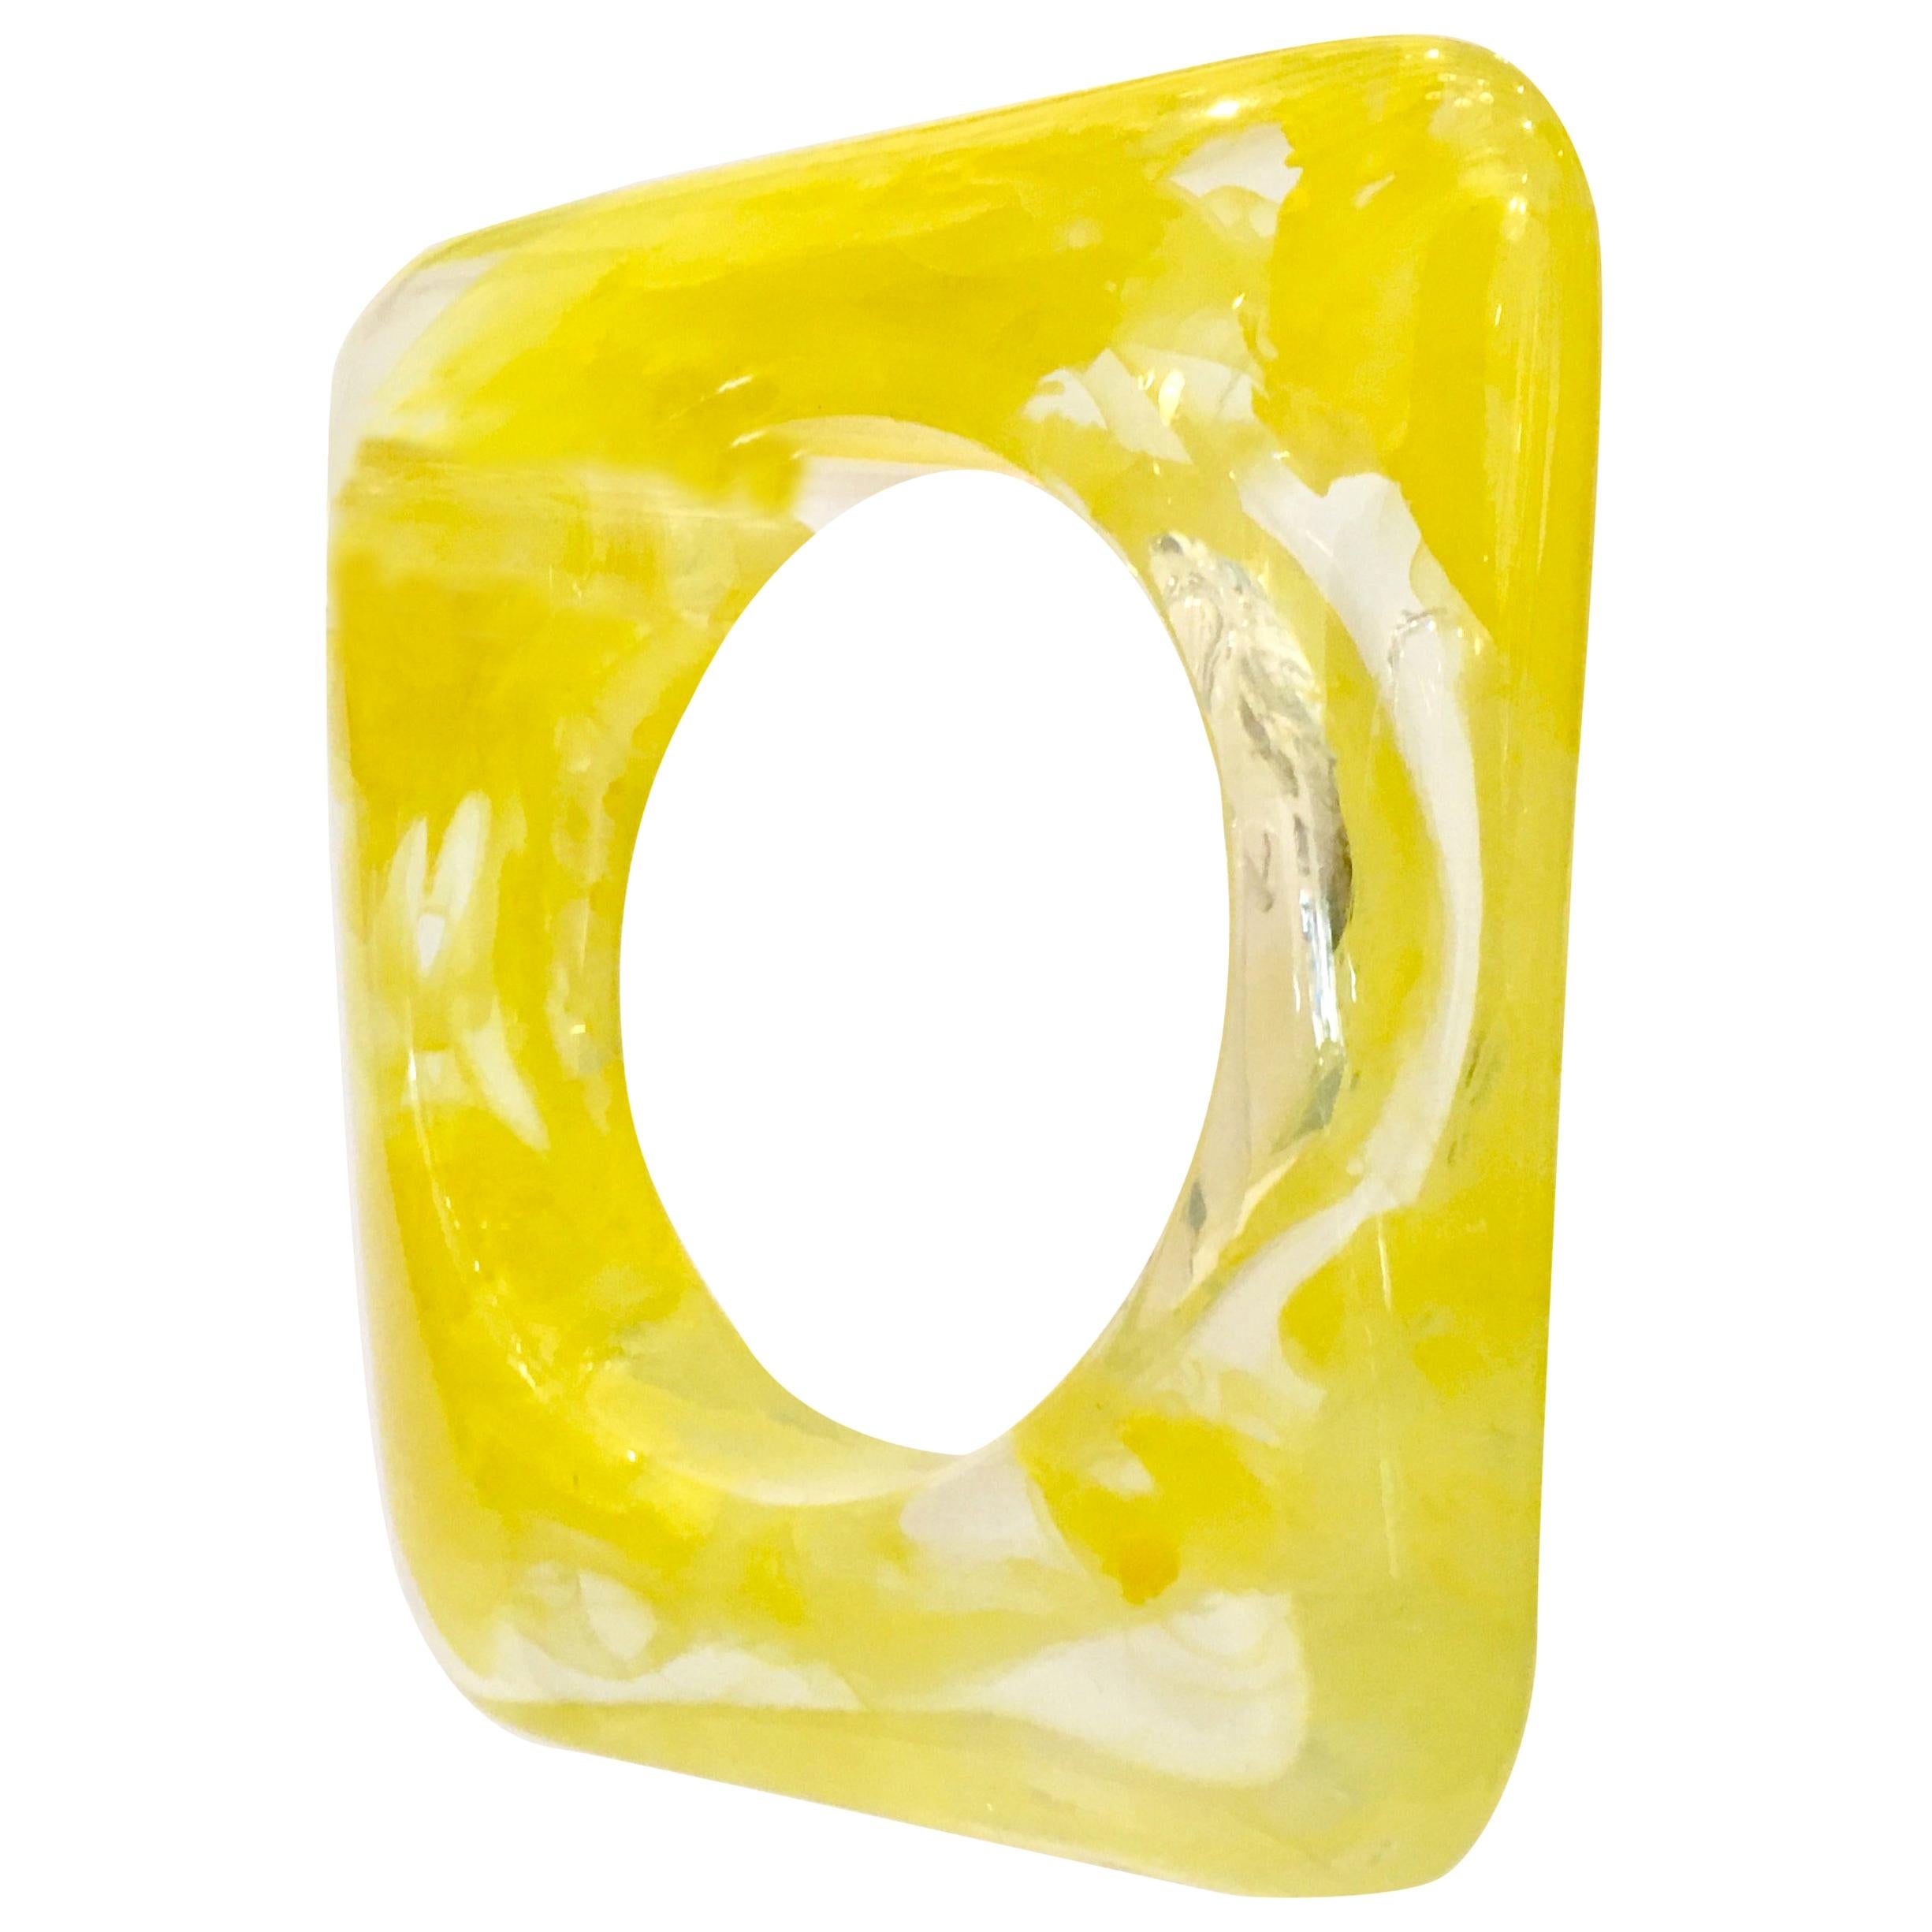 Lucite Organic Form Circle In A Square Bangle Bracelet For Sale